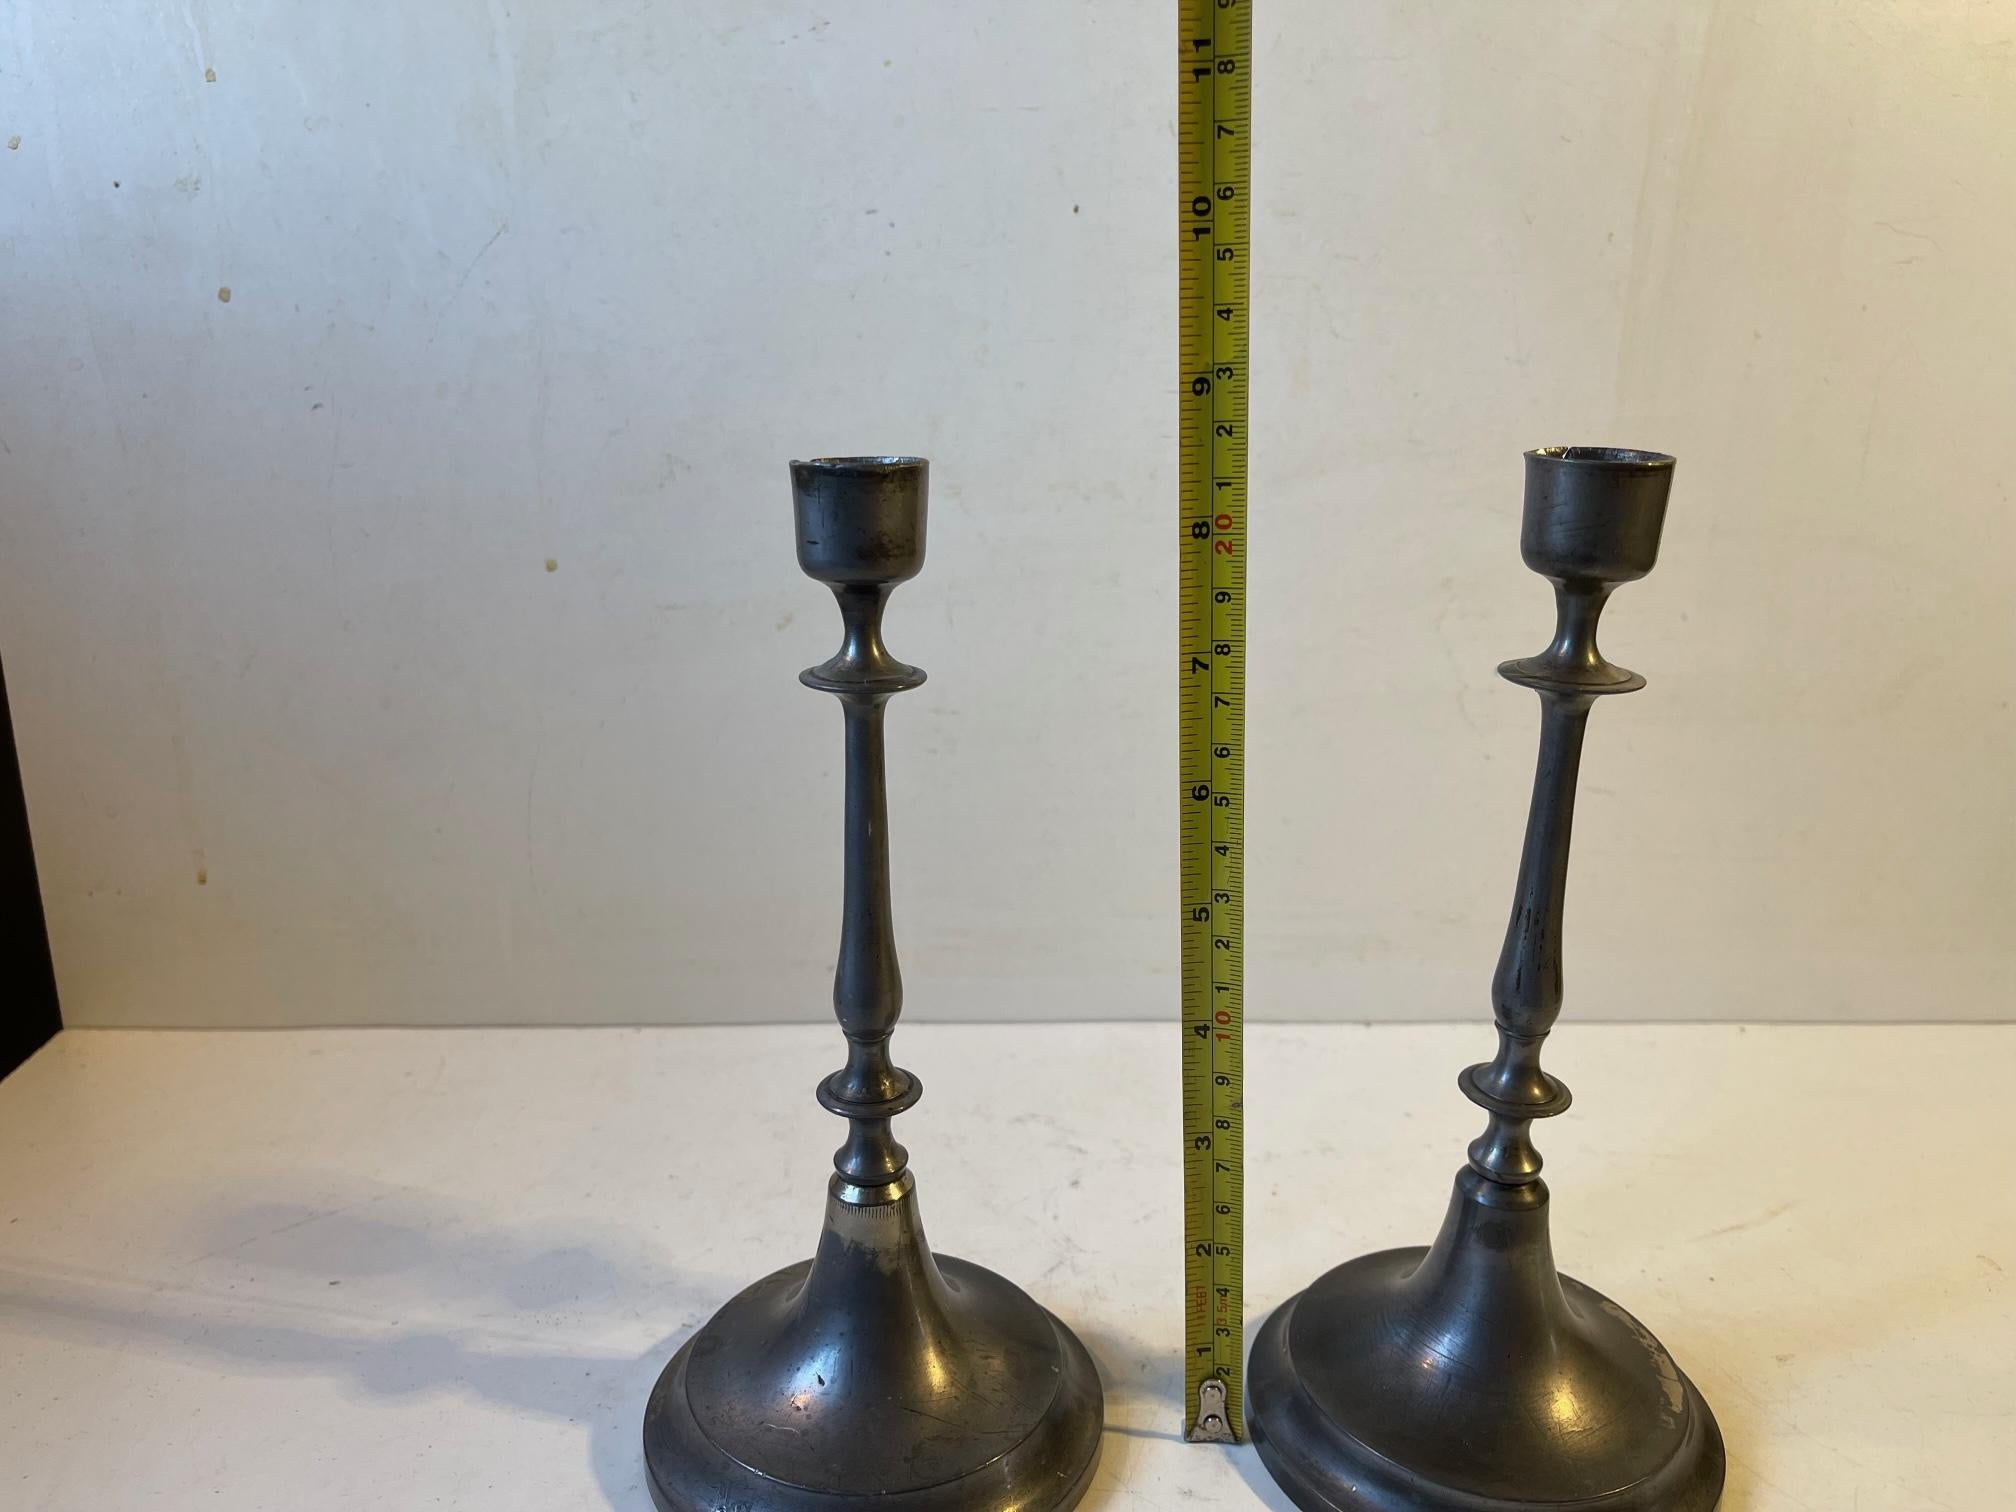 Antique Scandinavian Candlesticks in Pewter In Fair Condition For Sale In Esbjerg, DK